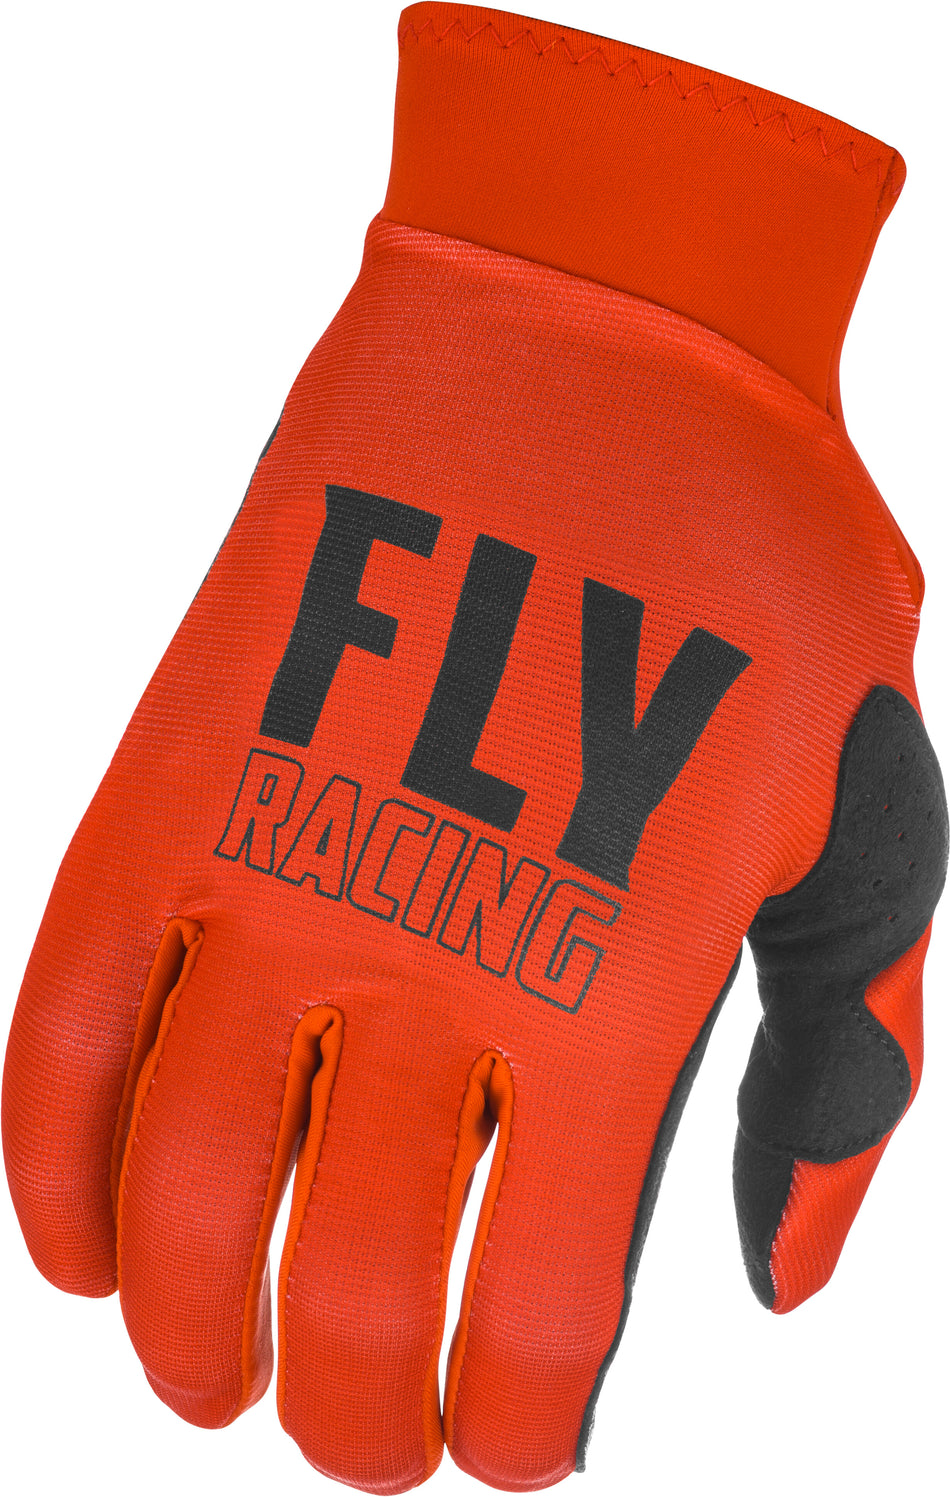 FLY RACING Pro Lite Gloves Red/Black Sz 09 374-85209